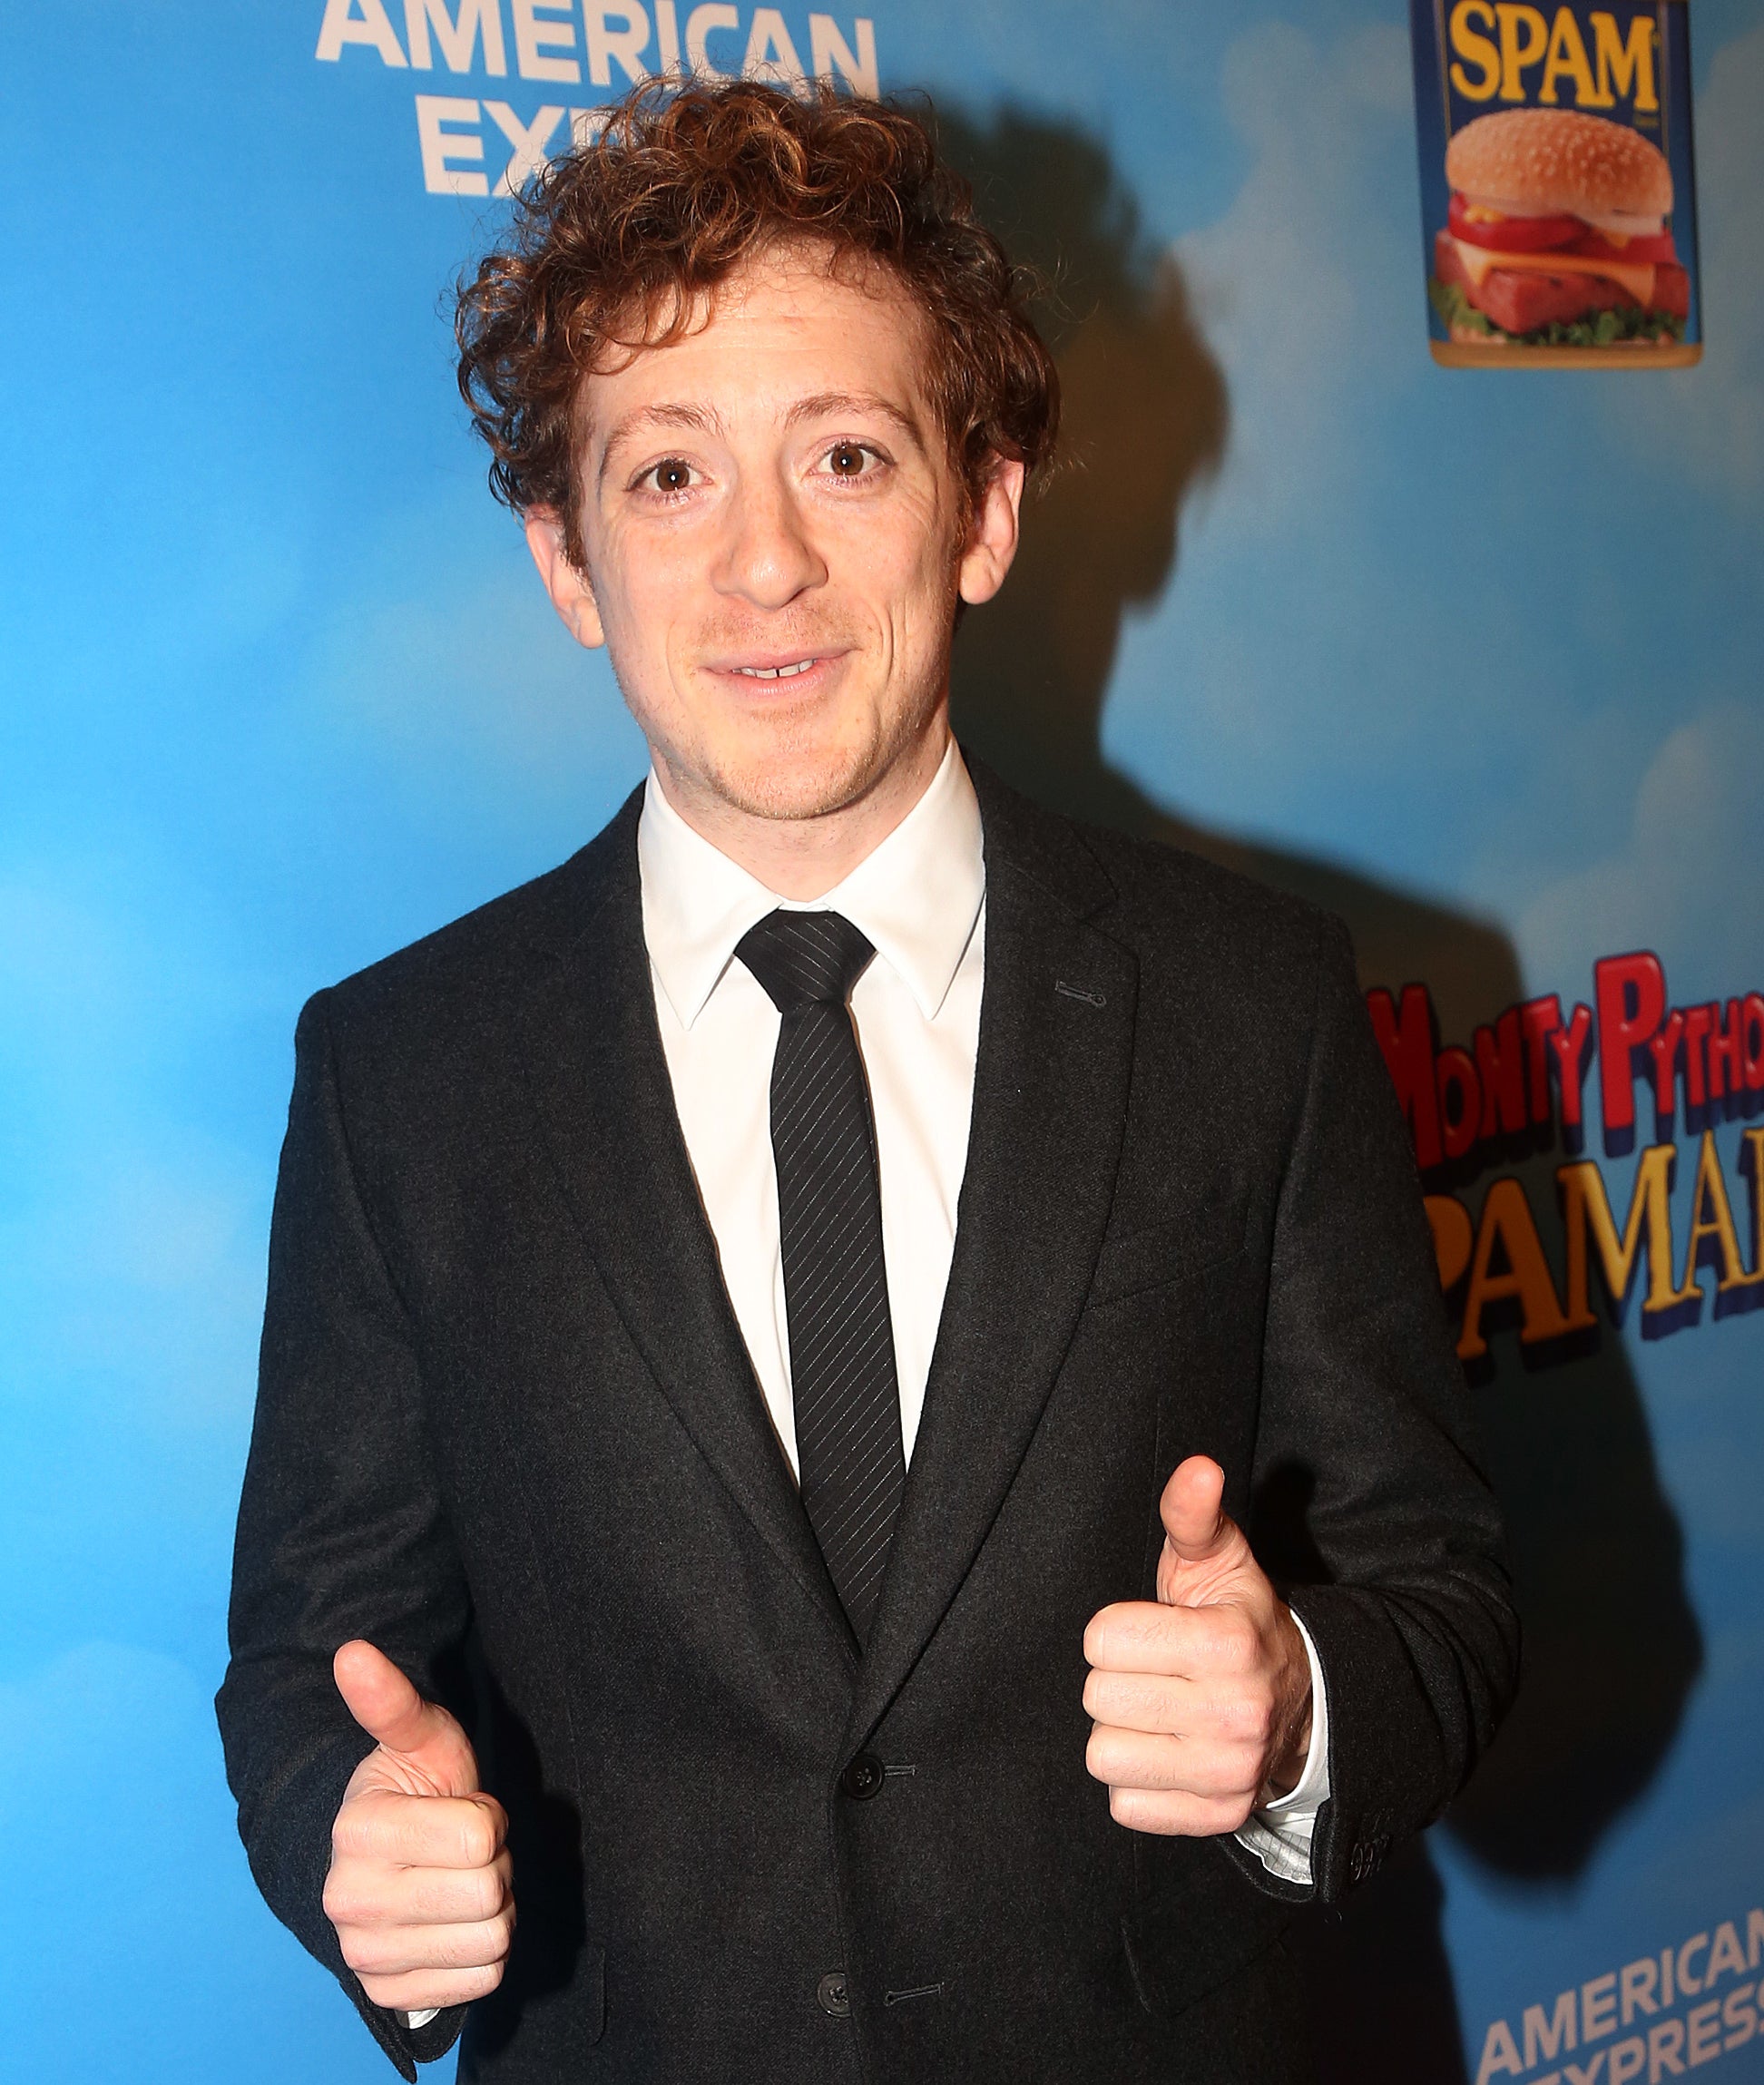 Ethan Slater in suit and tie gives thumbs up at an event